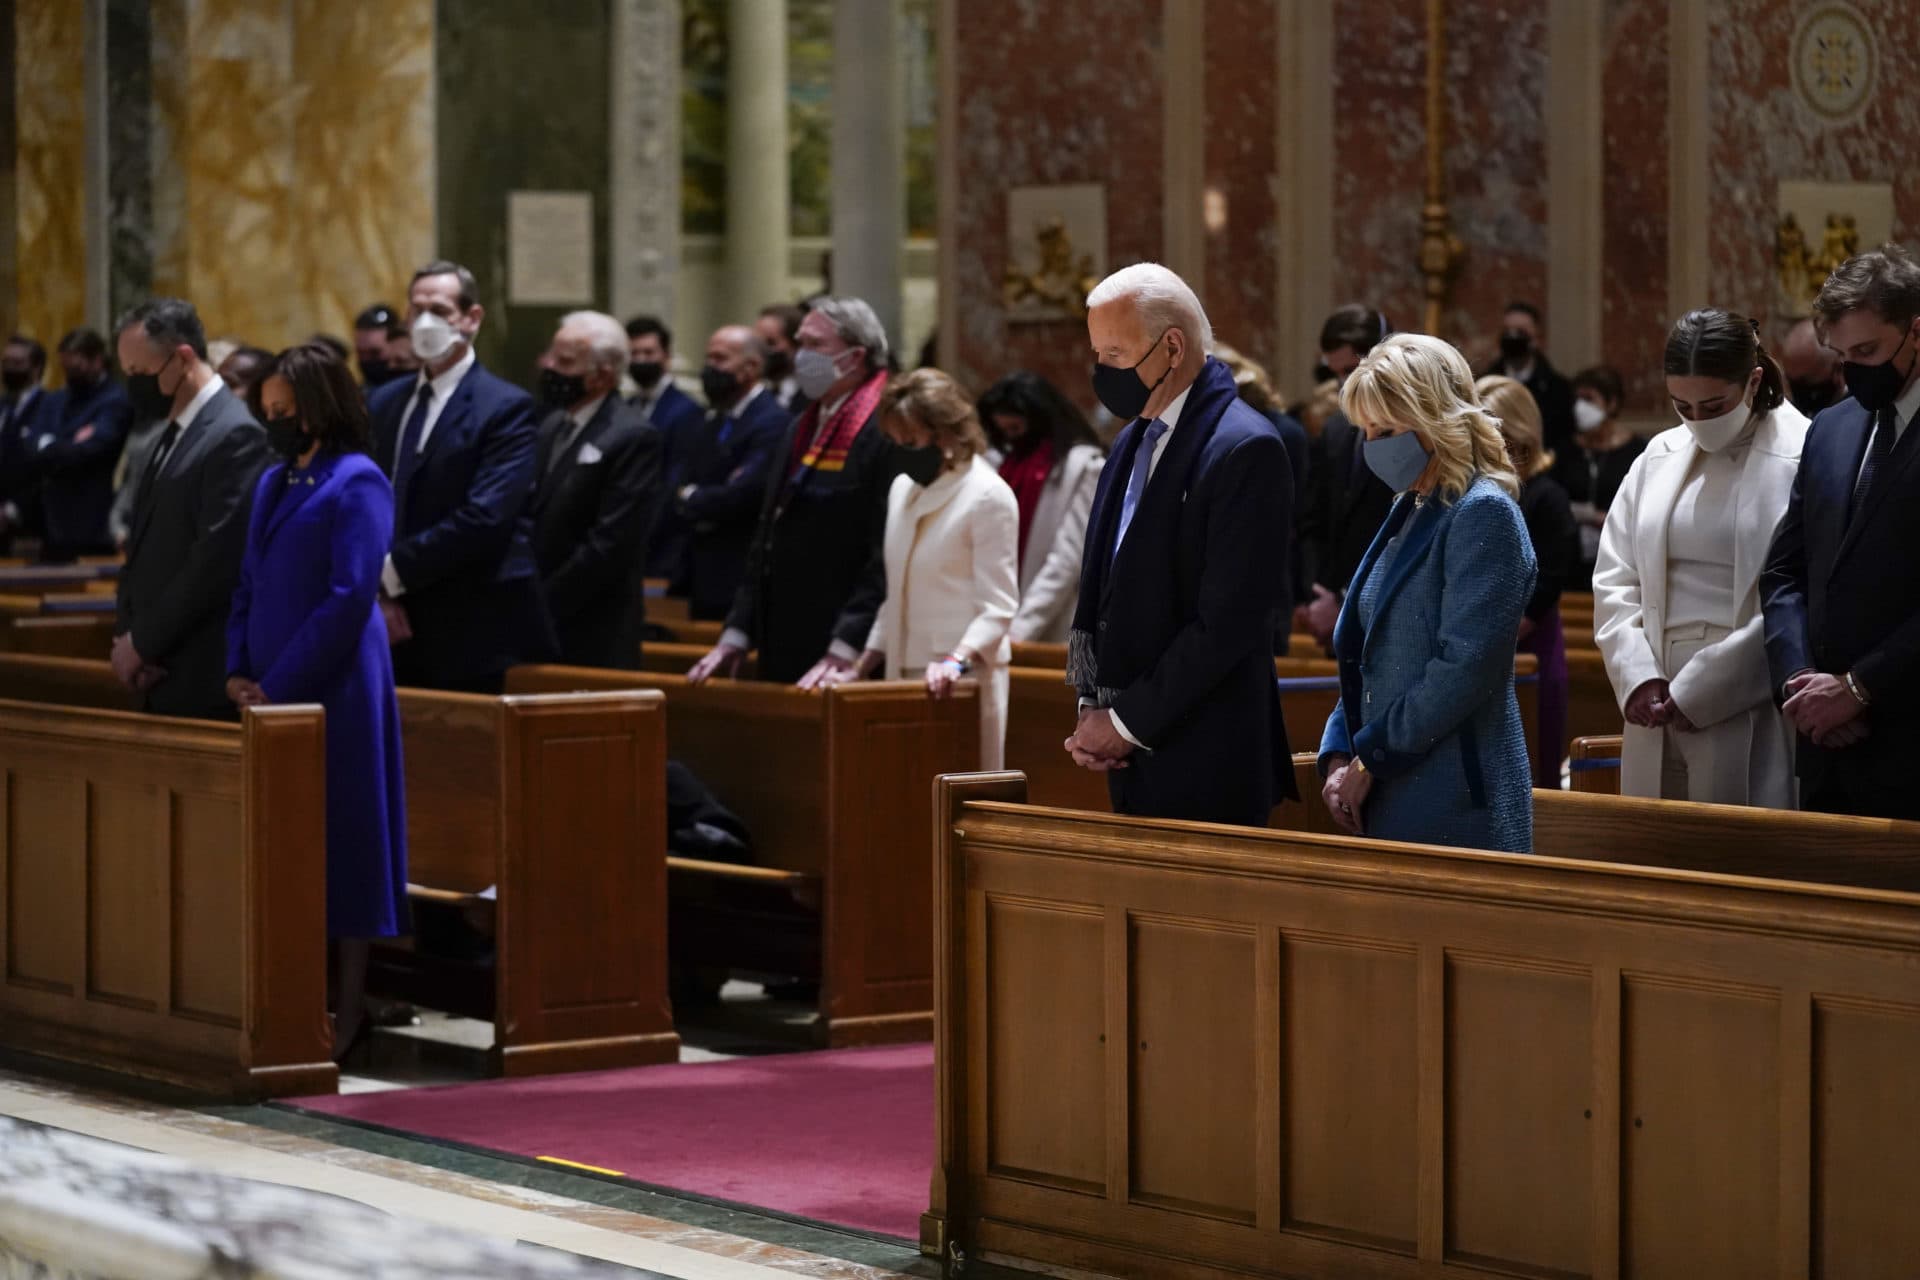 The Bidens attend Mass at the Cathedral of St. Matthew the Apostle on Wednesday morning ahead of the inauguration ceremony. Harris and her husband Doug Emhoff are at left. (Evan Vucci/AP)